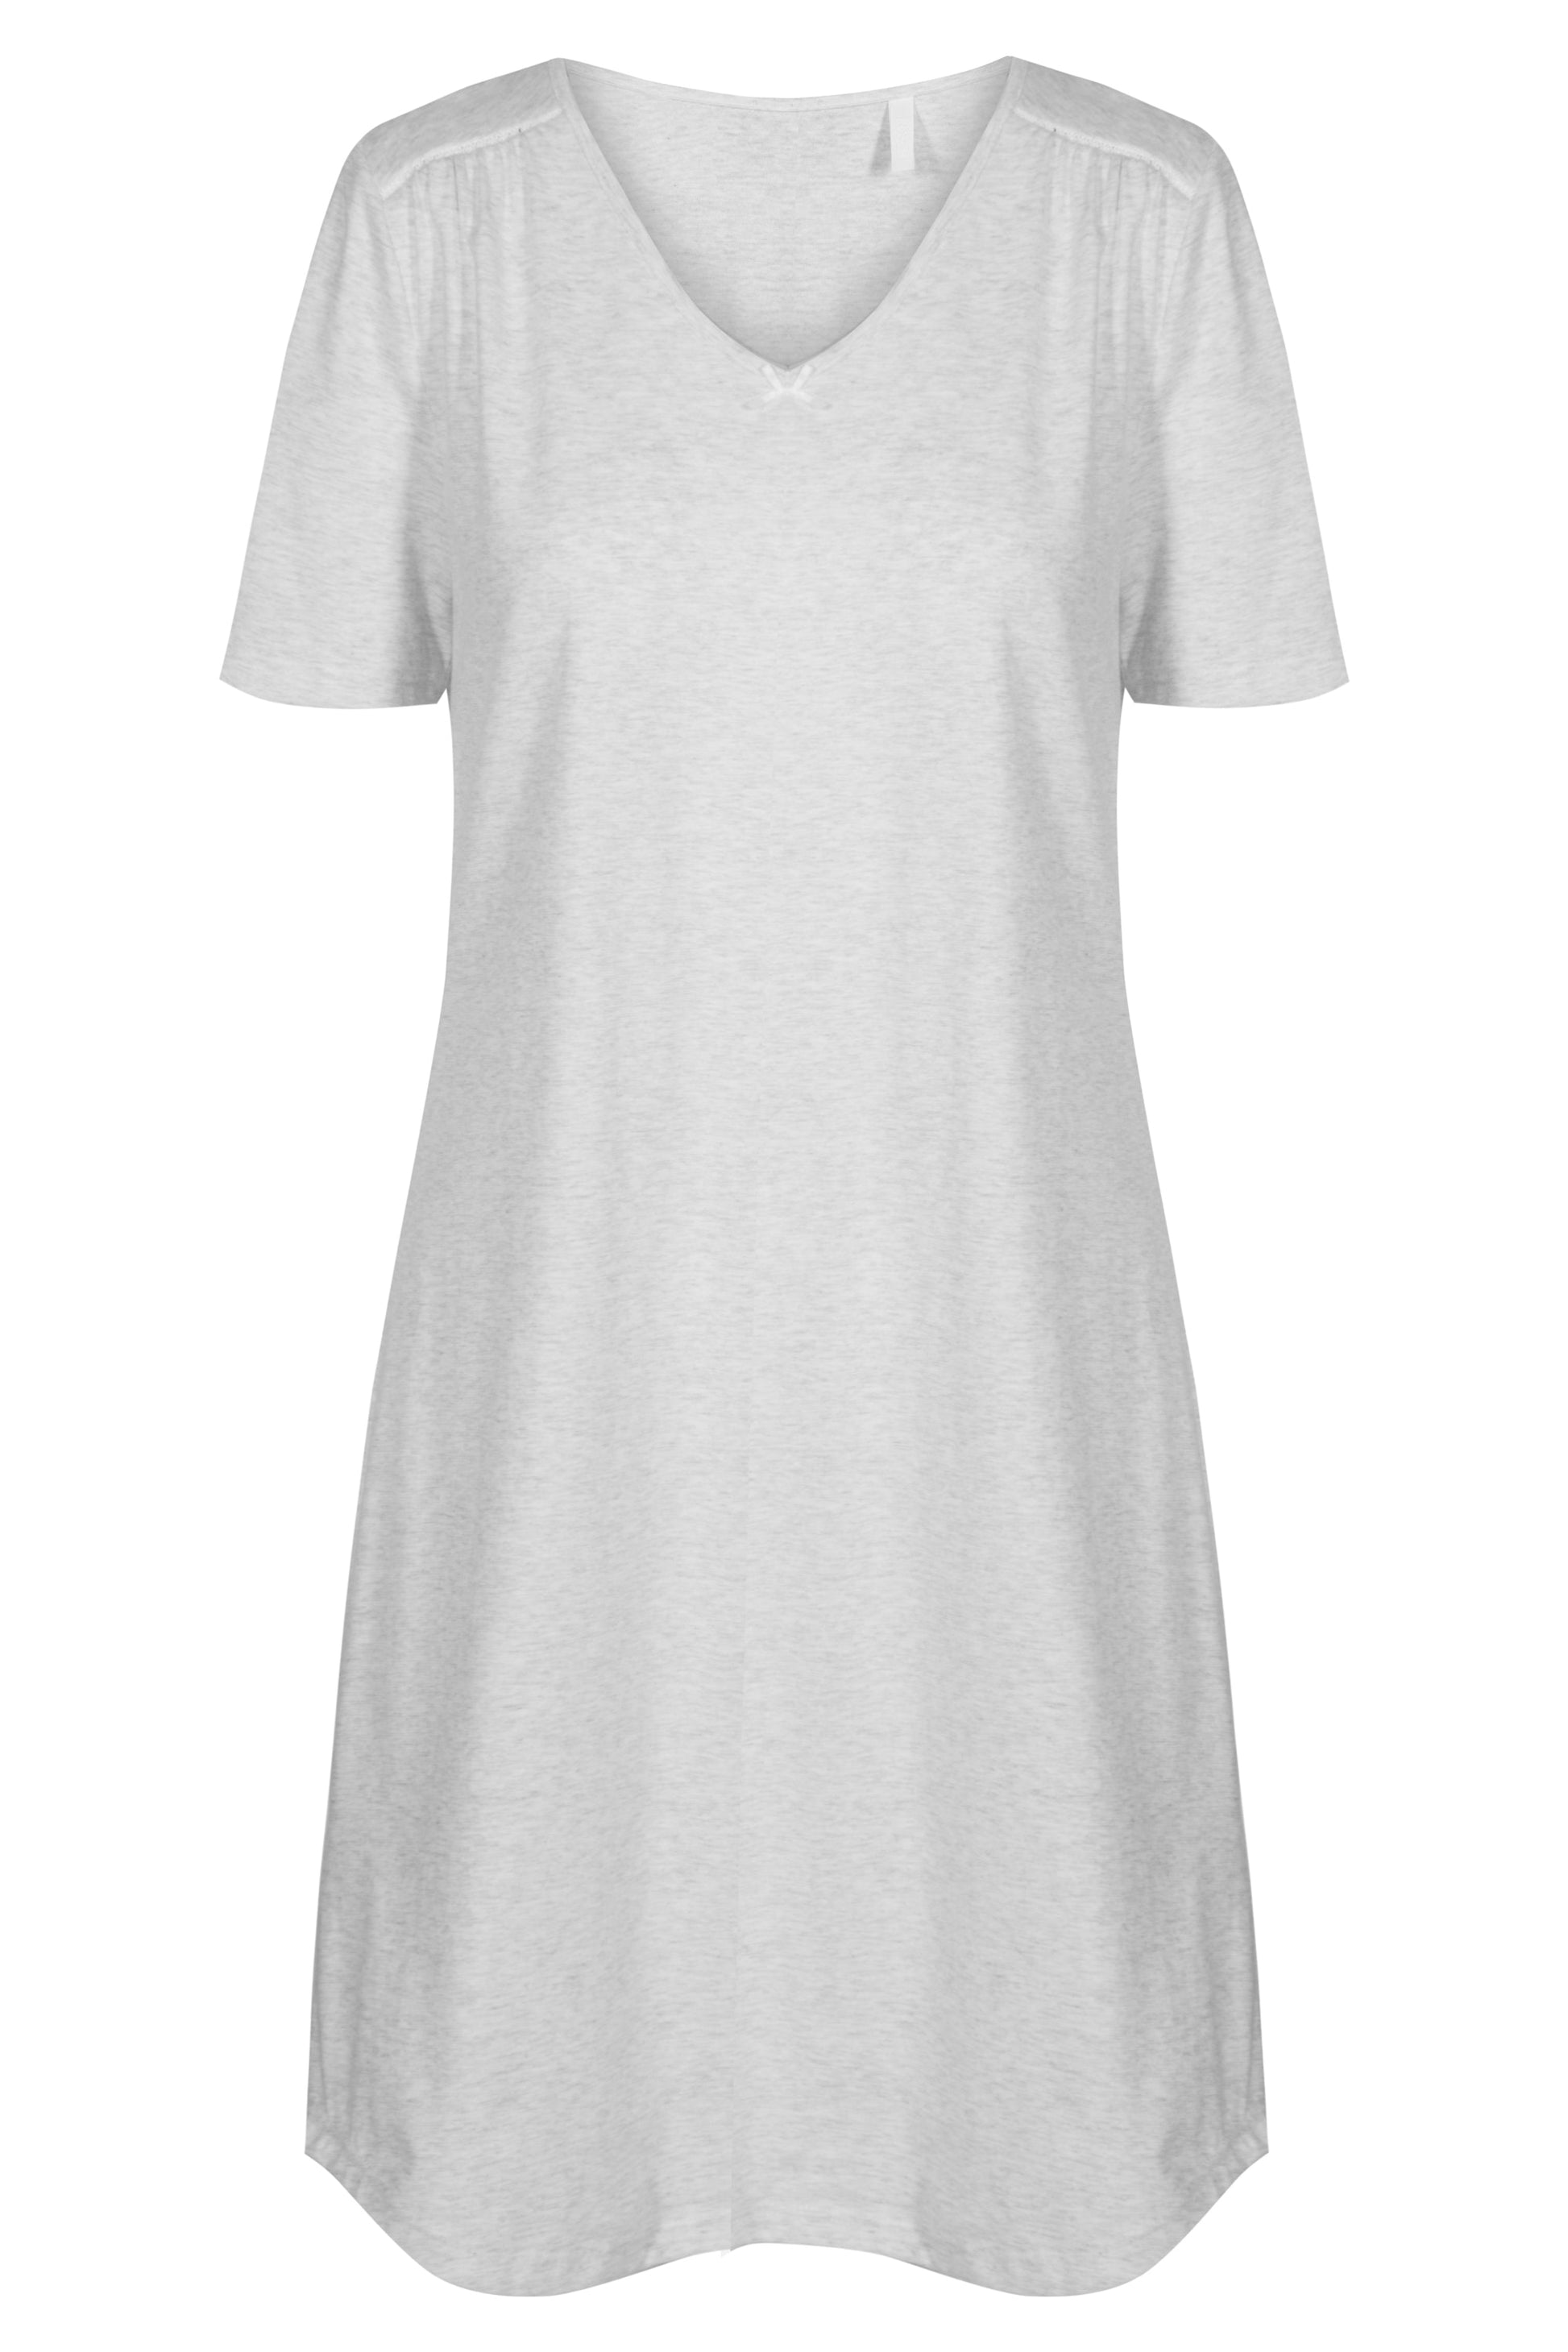 This nightgown from the Smart Casual line by Rösch features a lightweight, soft, and thin jersey cotton fabric that ensures breathability, smoothness, and durability.